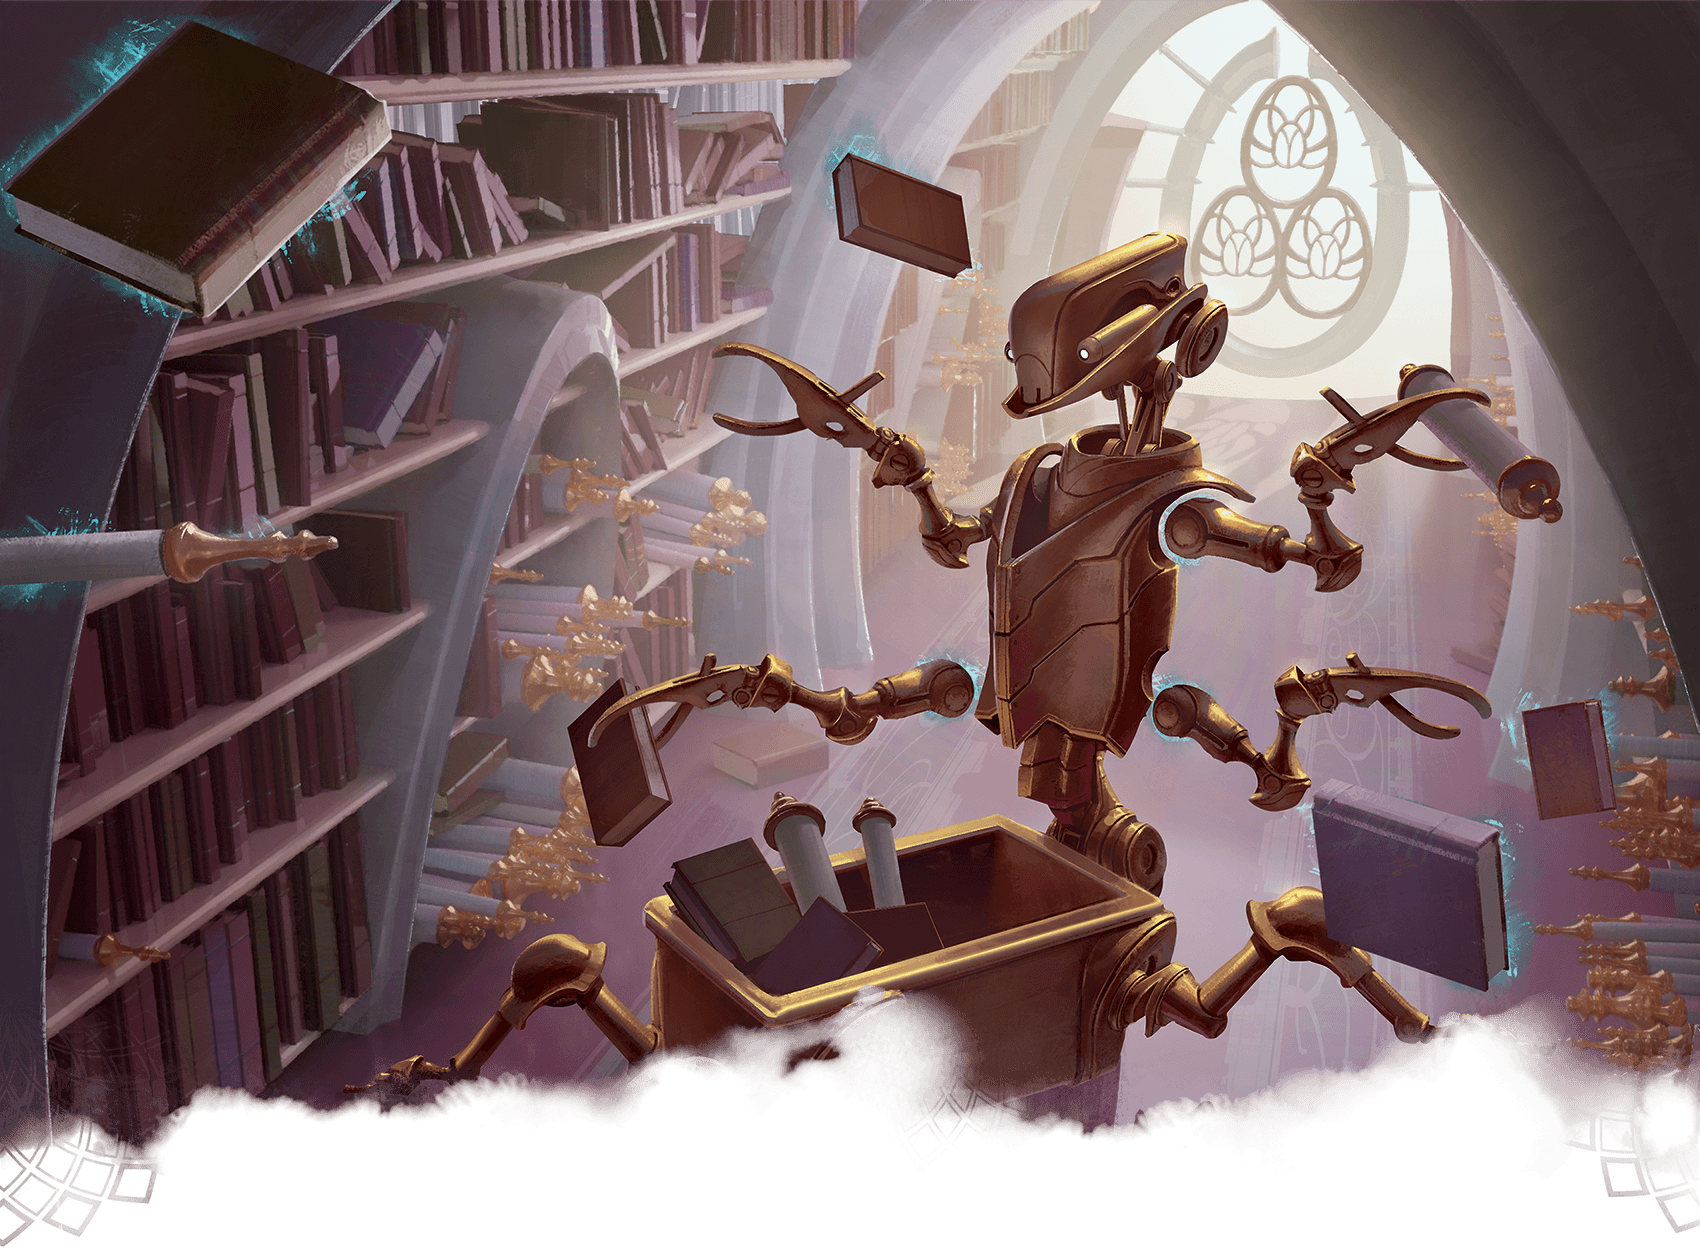 A mechanized library assistant with four arms pulls books and scrolls from bookshelves